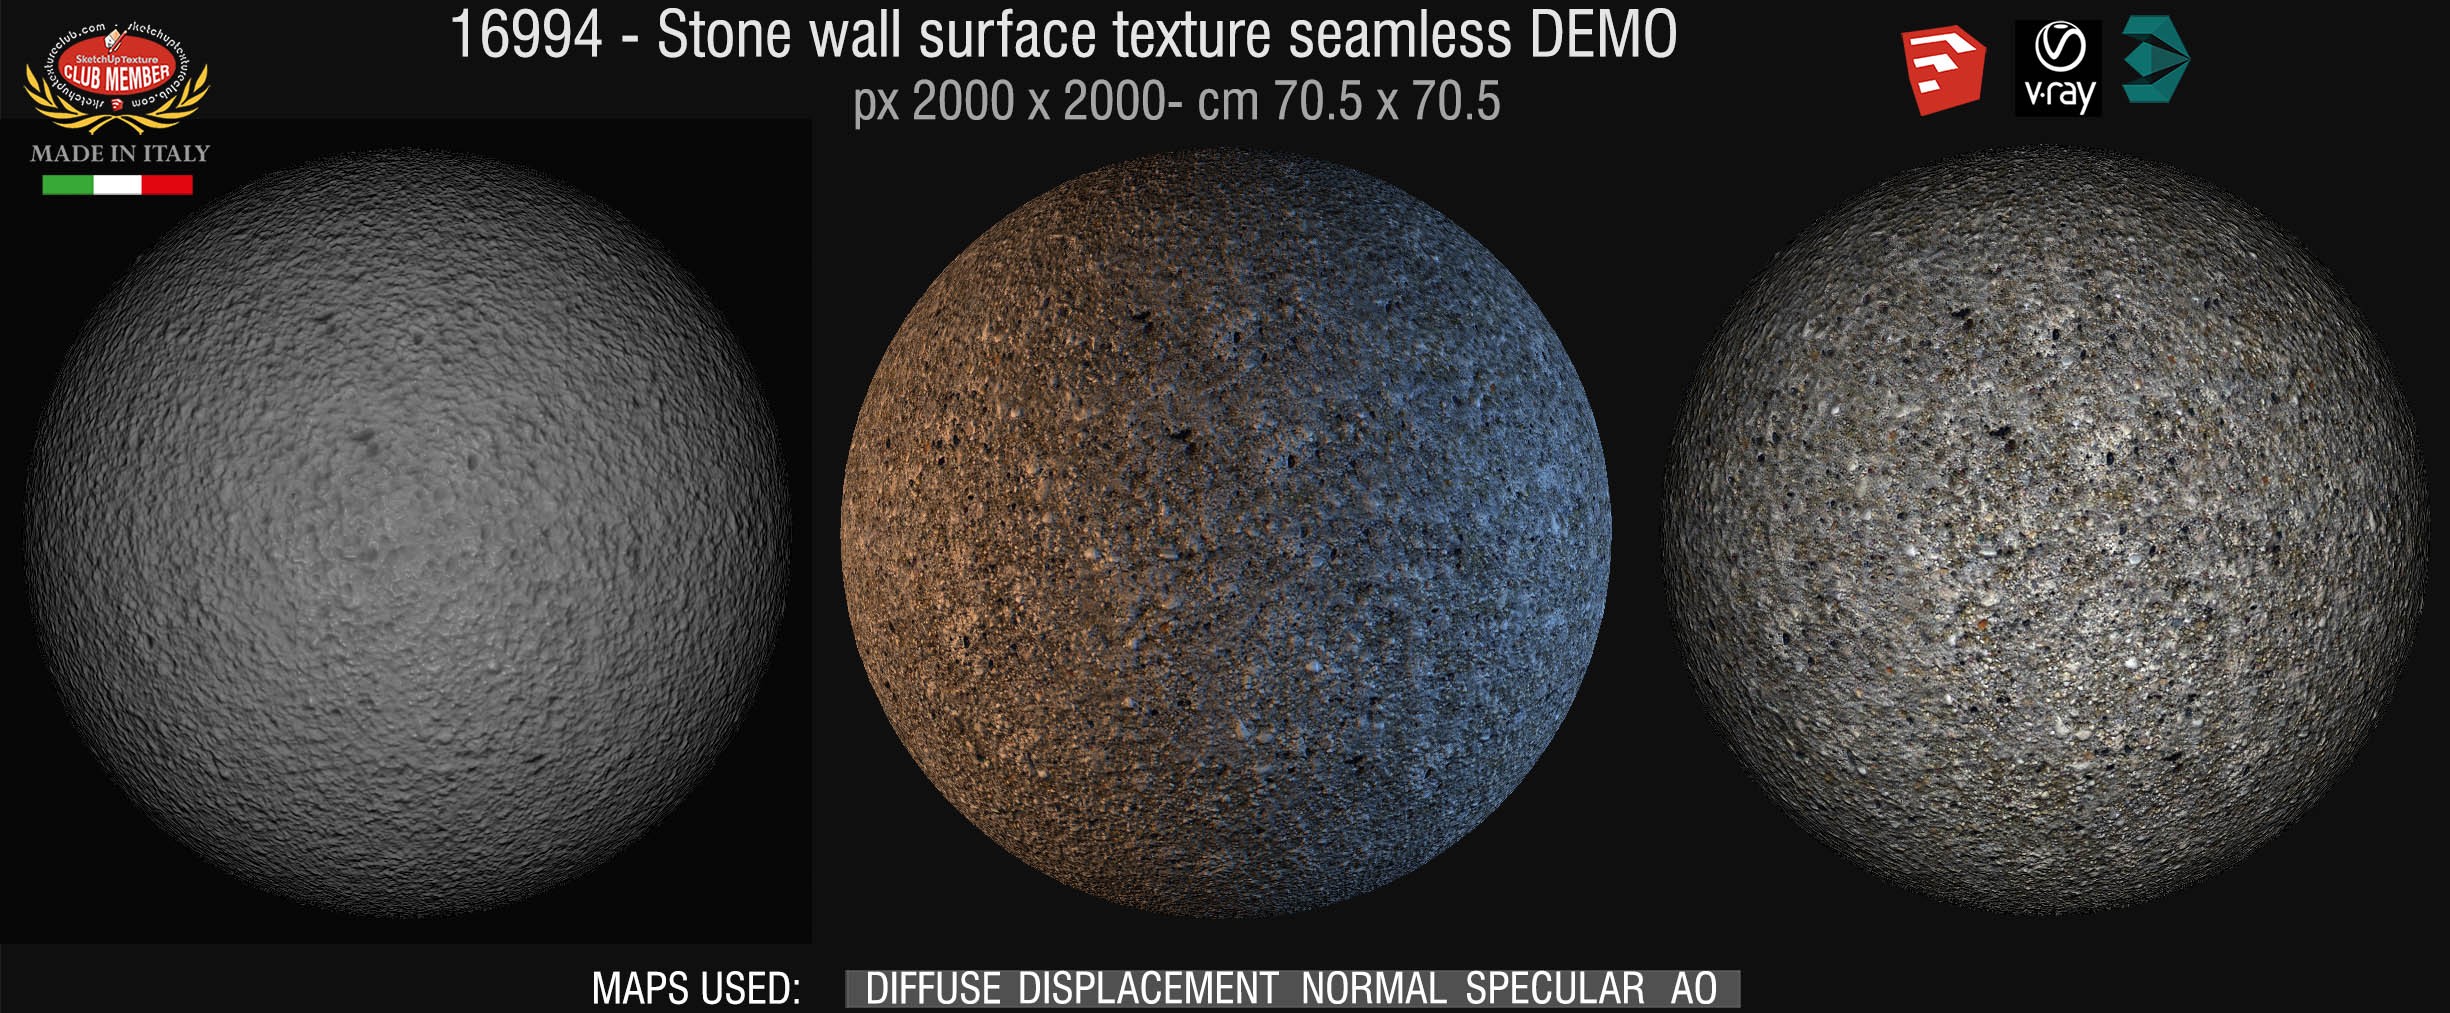 16994 Stone wall surface texture seamless + maps DEMO